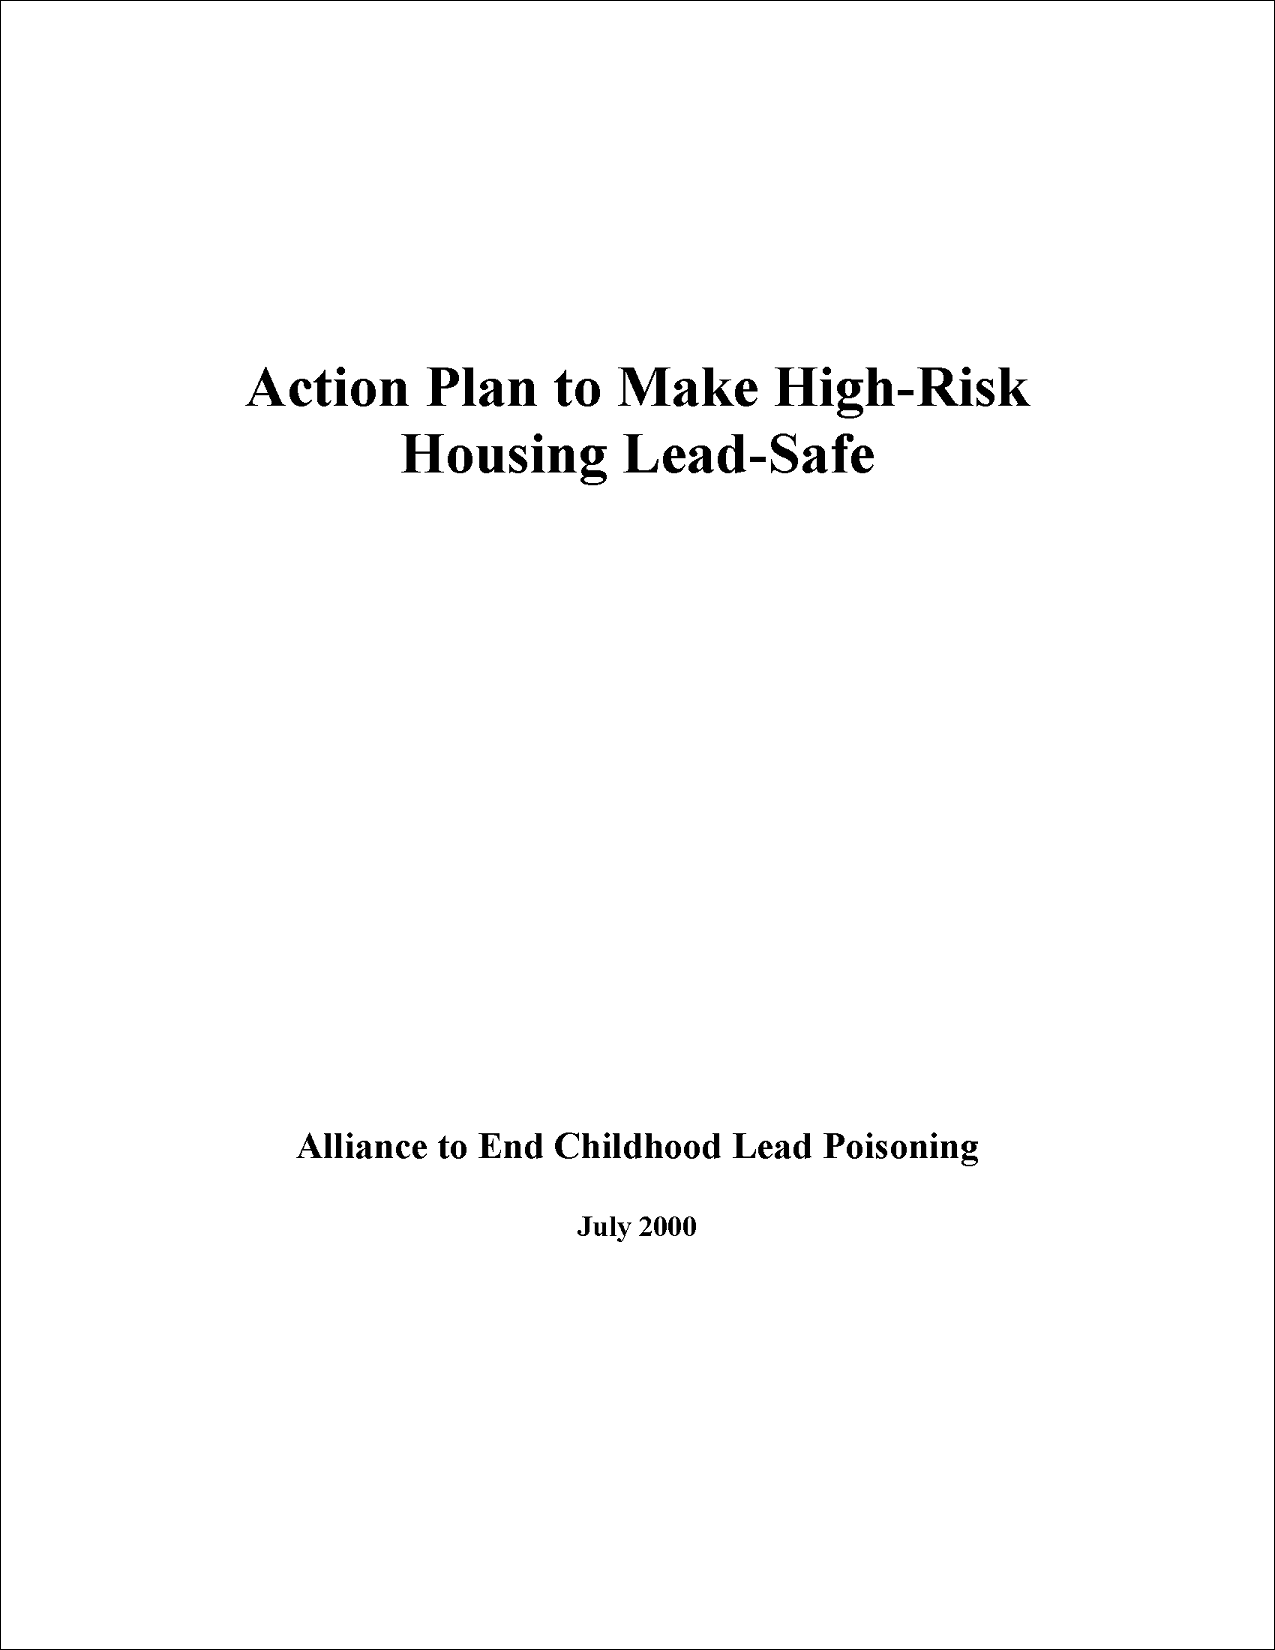 Action Plan to Make High-Risk Housing Lead-Safe